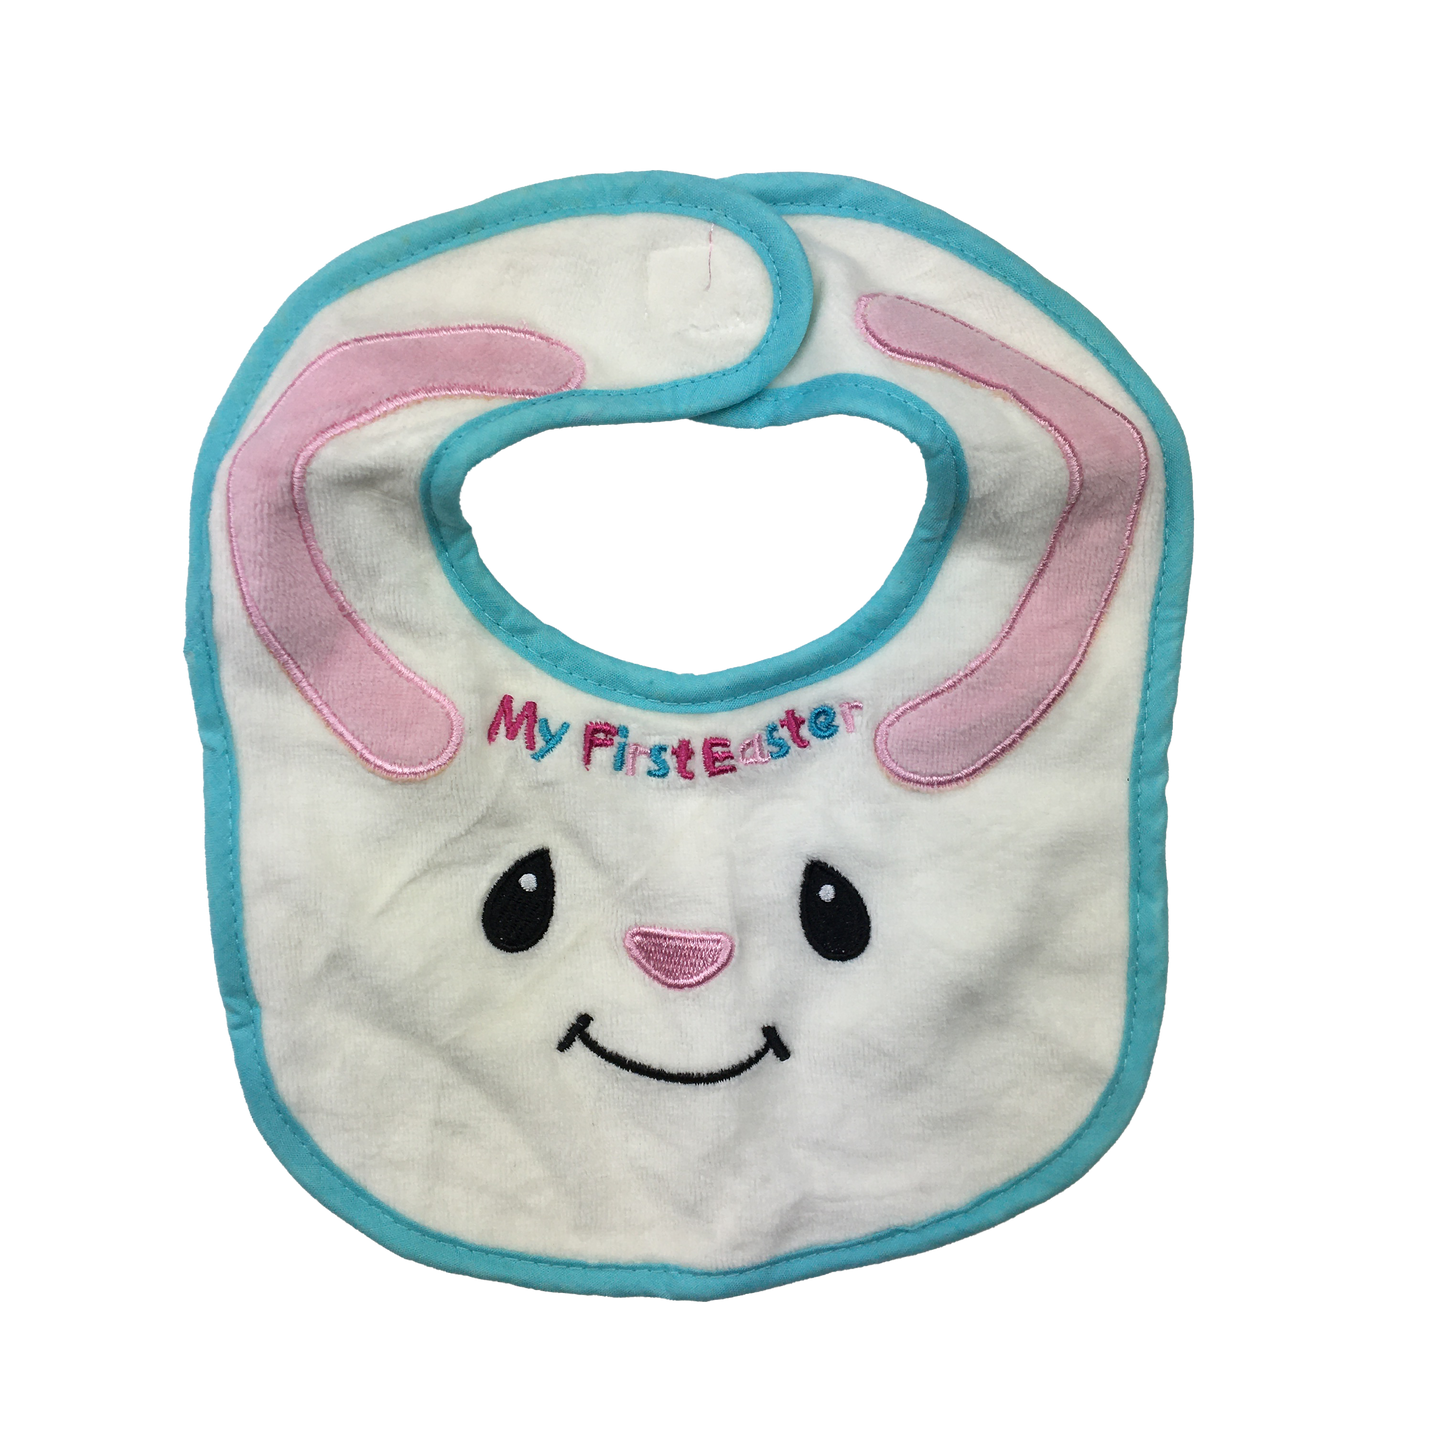 Carter's White Bib "My First Easter" One Size